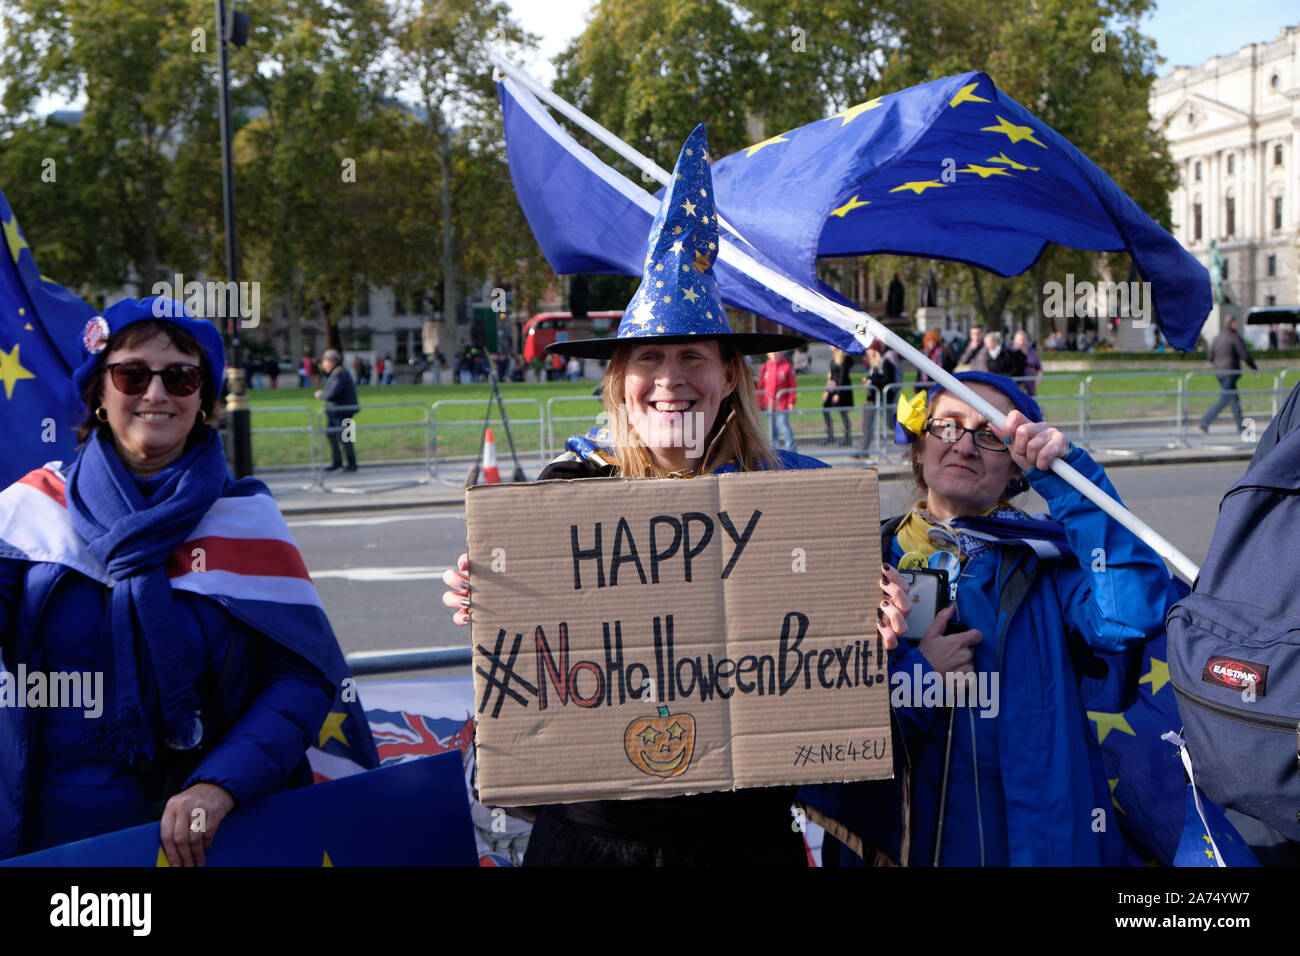 Westminster, England, UK. 30th October 2019.  Remain protesters in front of the House of Commons celebrating another delay in Brexit implementation, highlighting that the imposed deadline of Halloween will go by with the UK still in the European Union, contrarily to promises by the Prime Minister. Woman in  costume highlighting no Halloween Brexit. Credit: JF Pelletier/Alamy Live News. Stock Photo